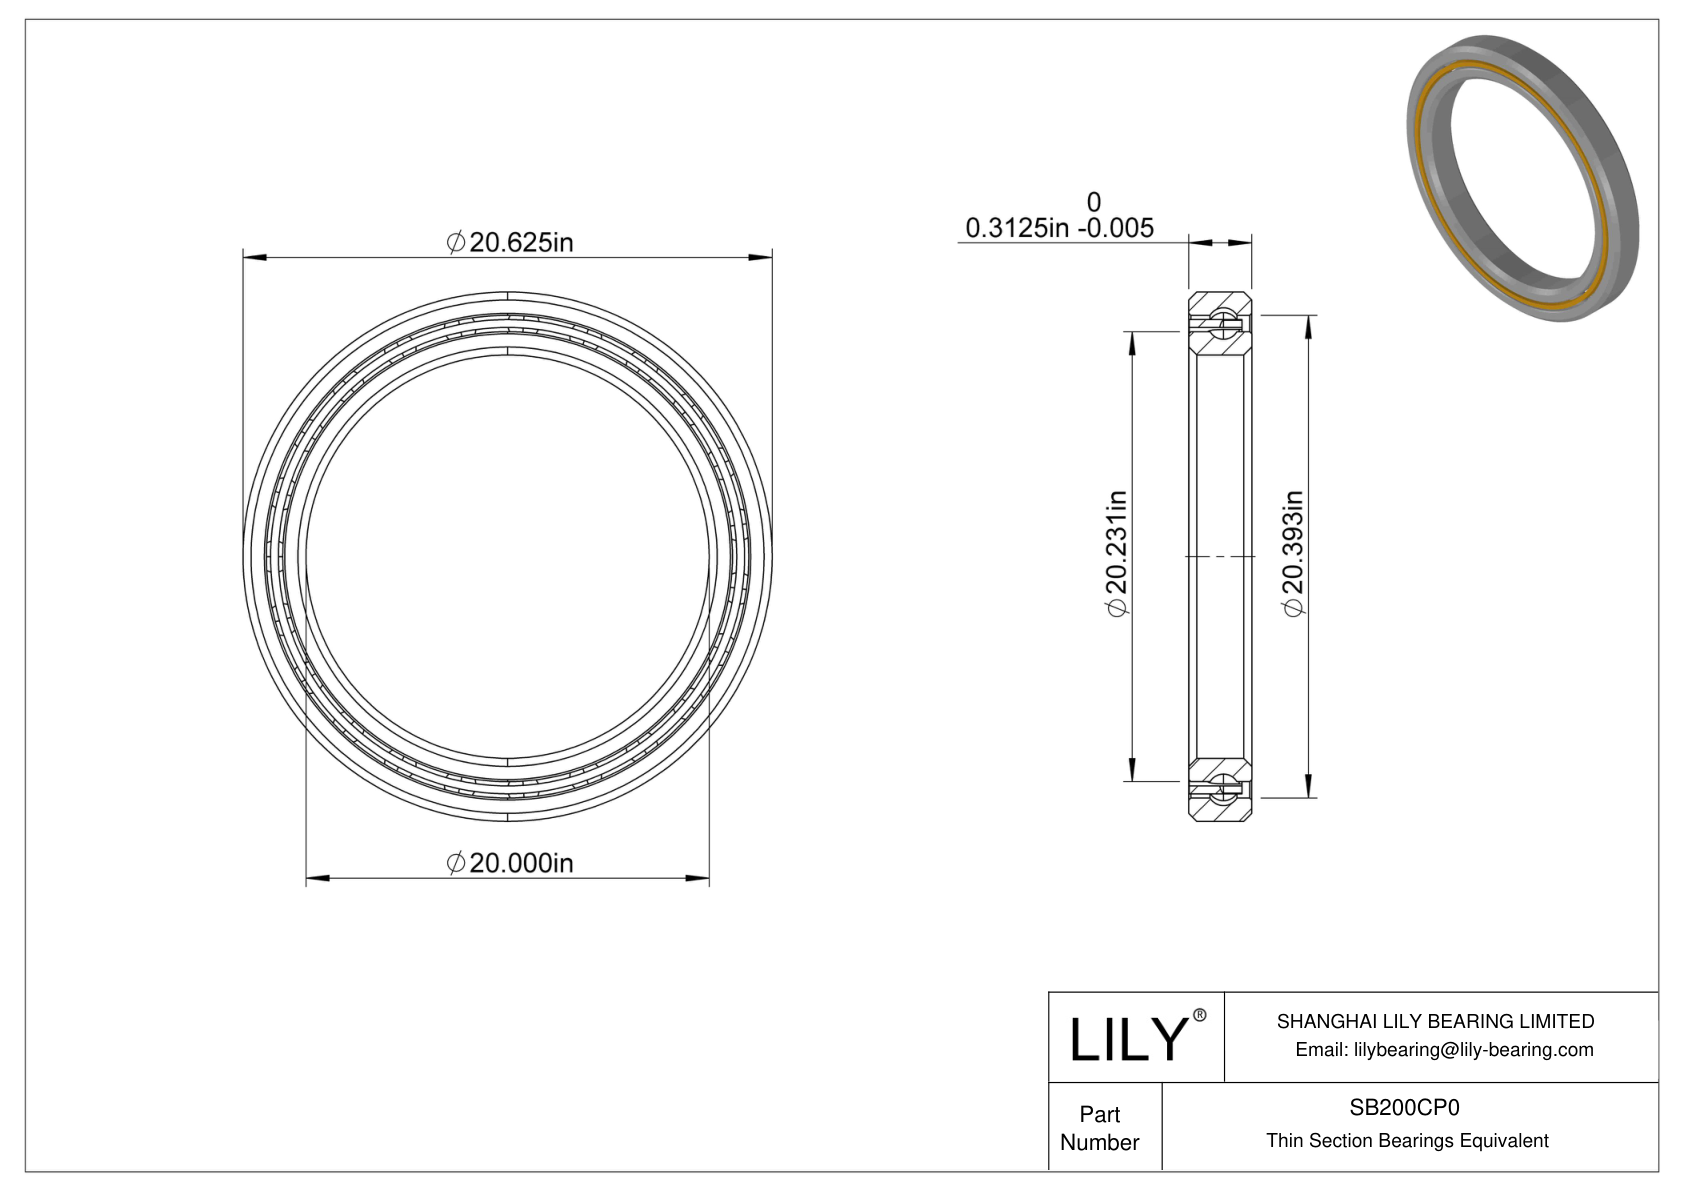 SB200CP0 Constant Section (CS) Bearings cad drawing